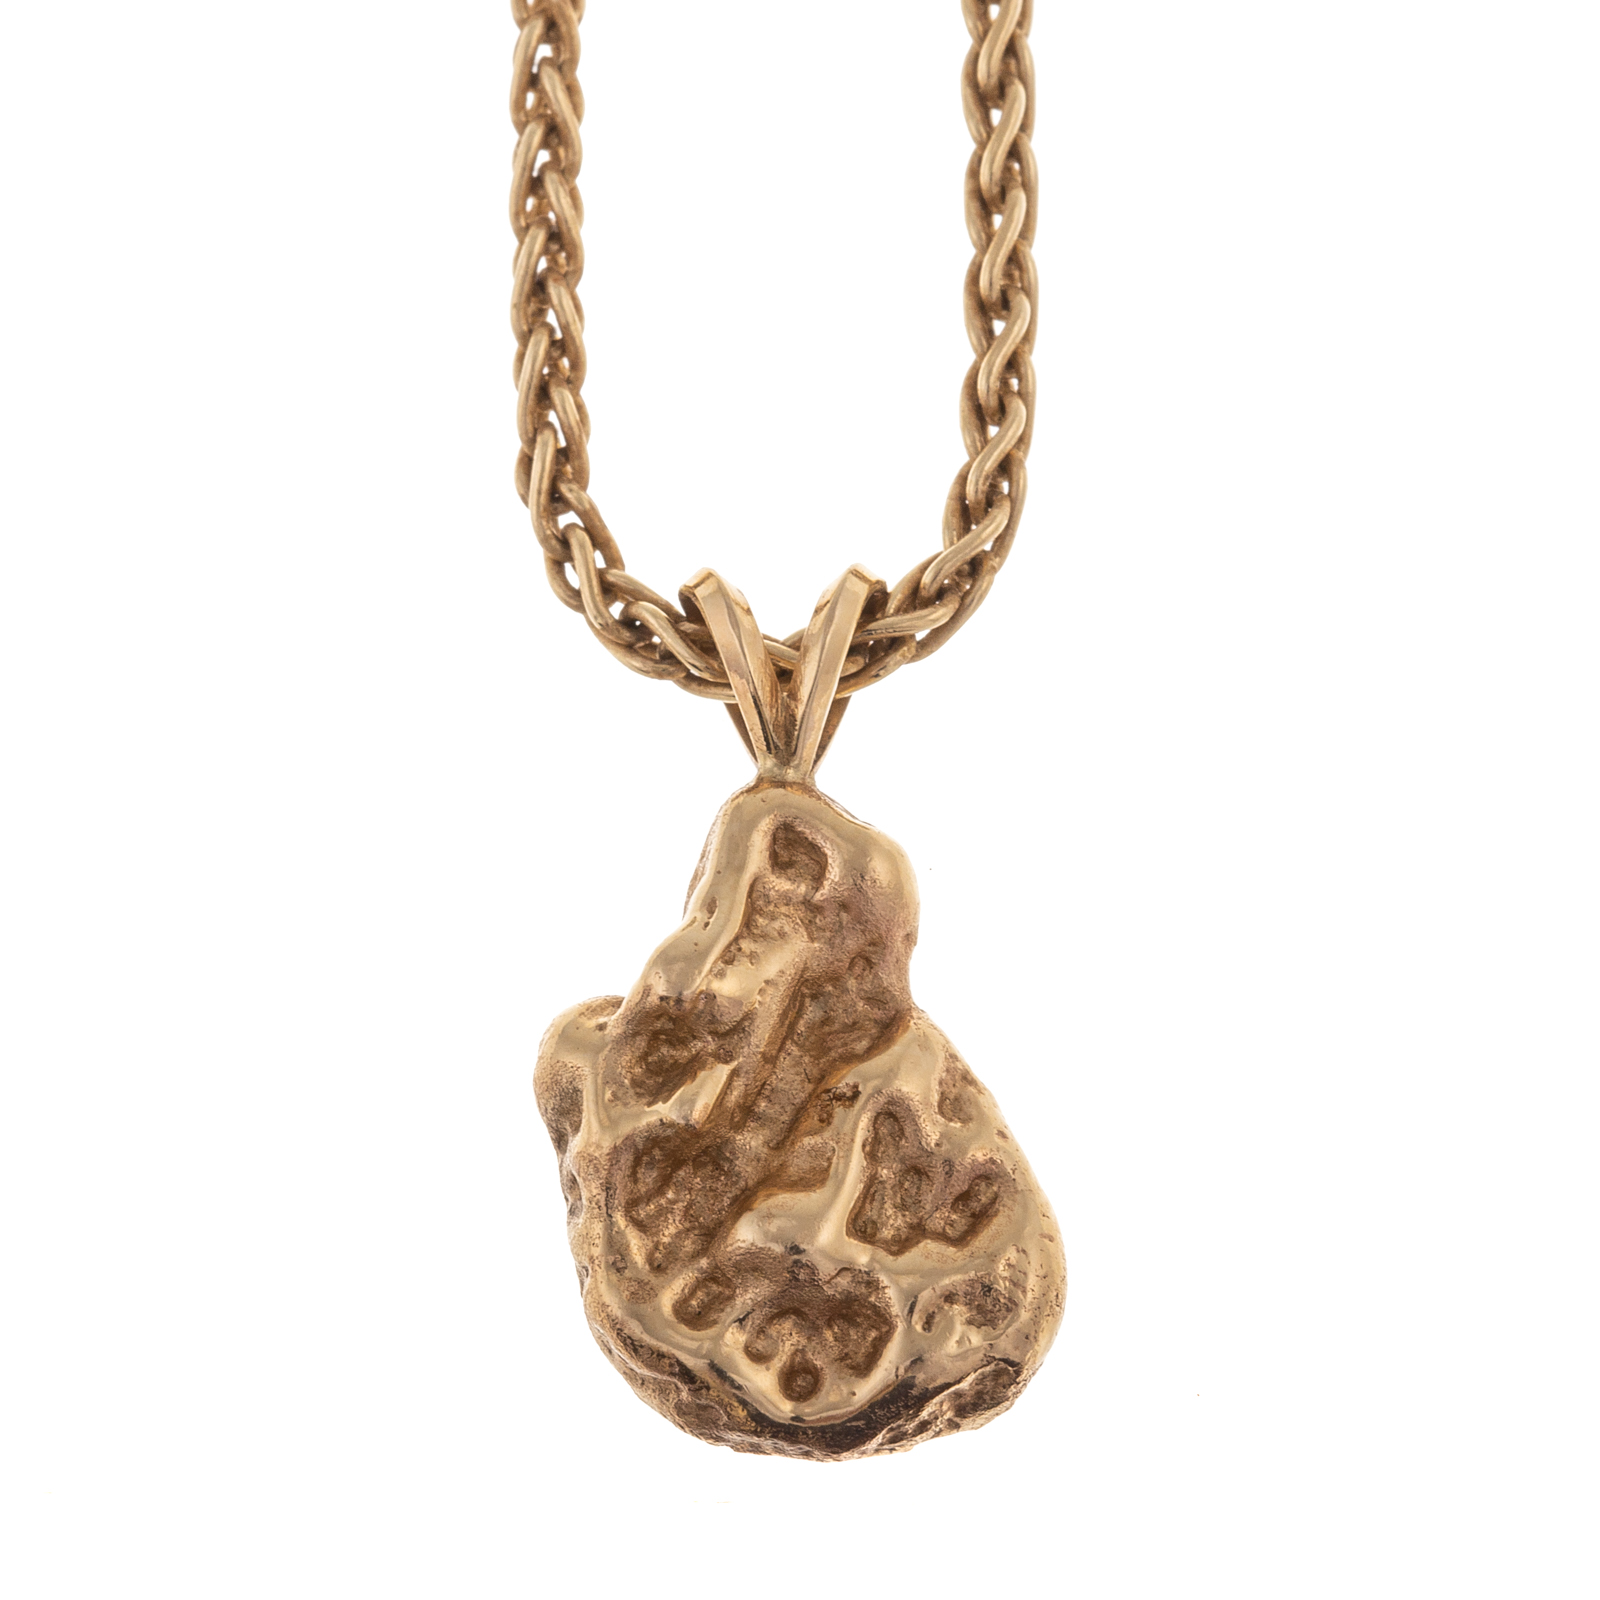 A NUGGET PENDANT ON WOVEN CHAIN